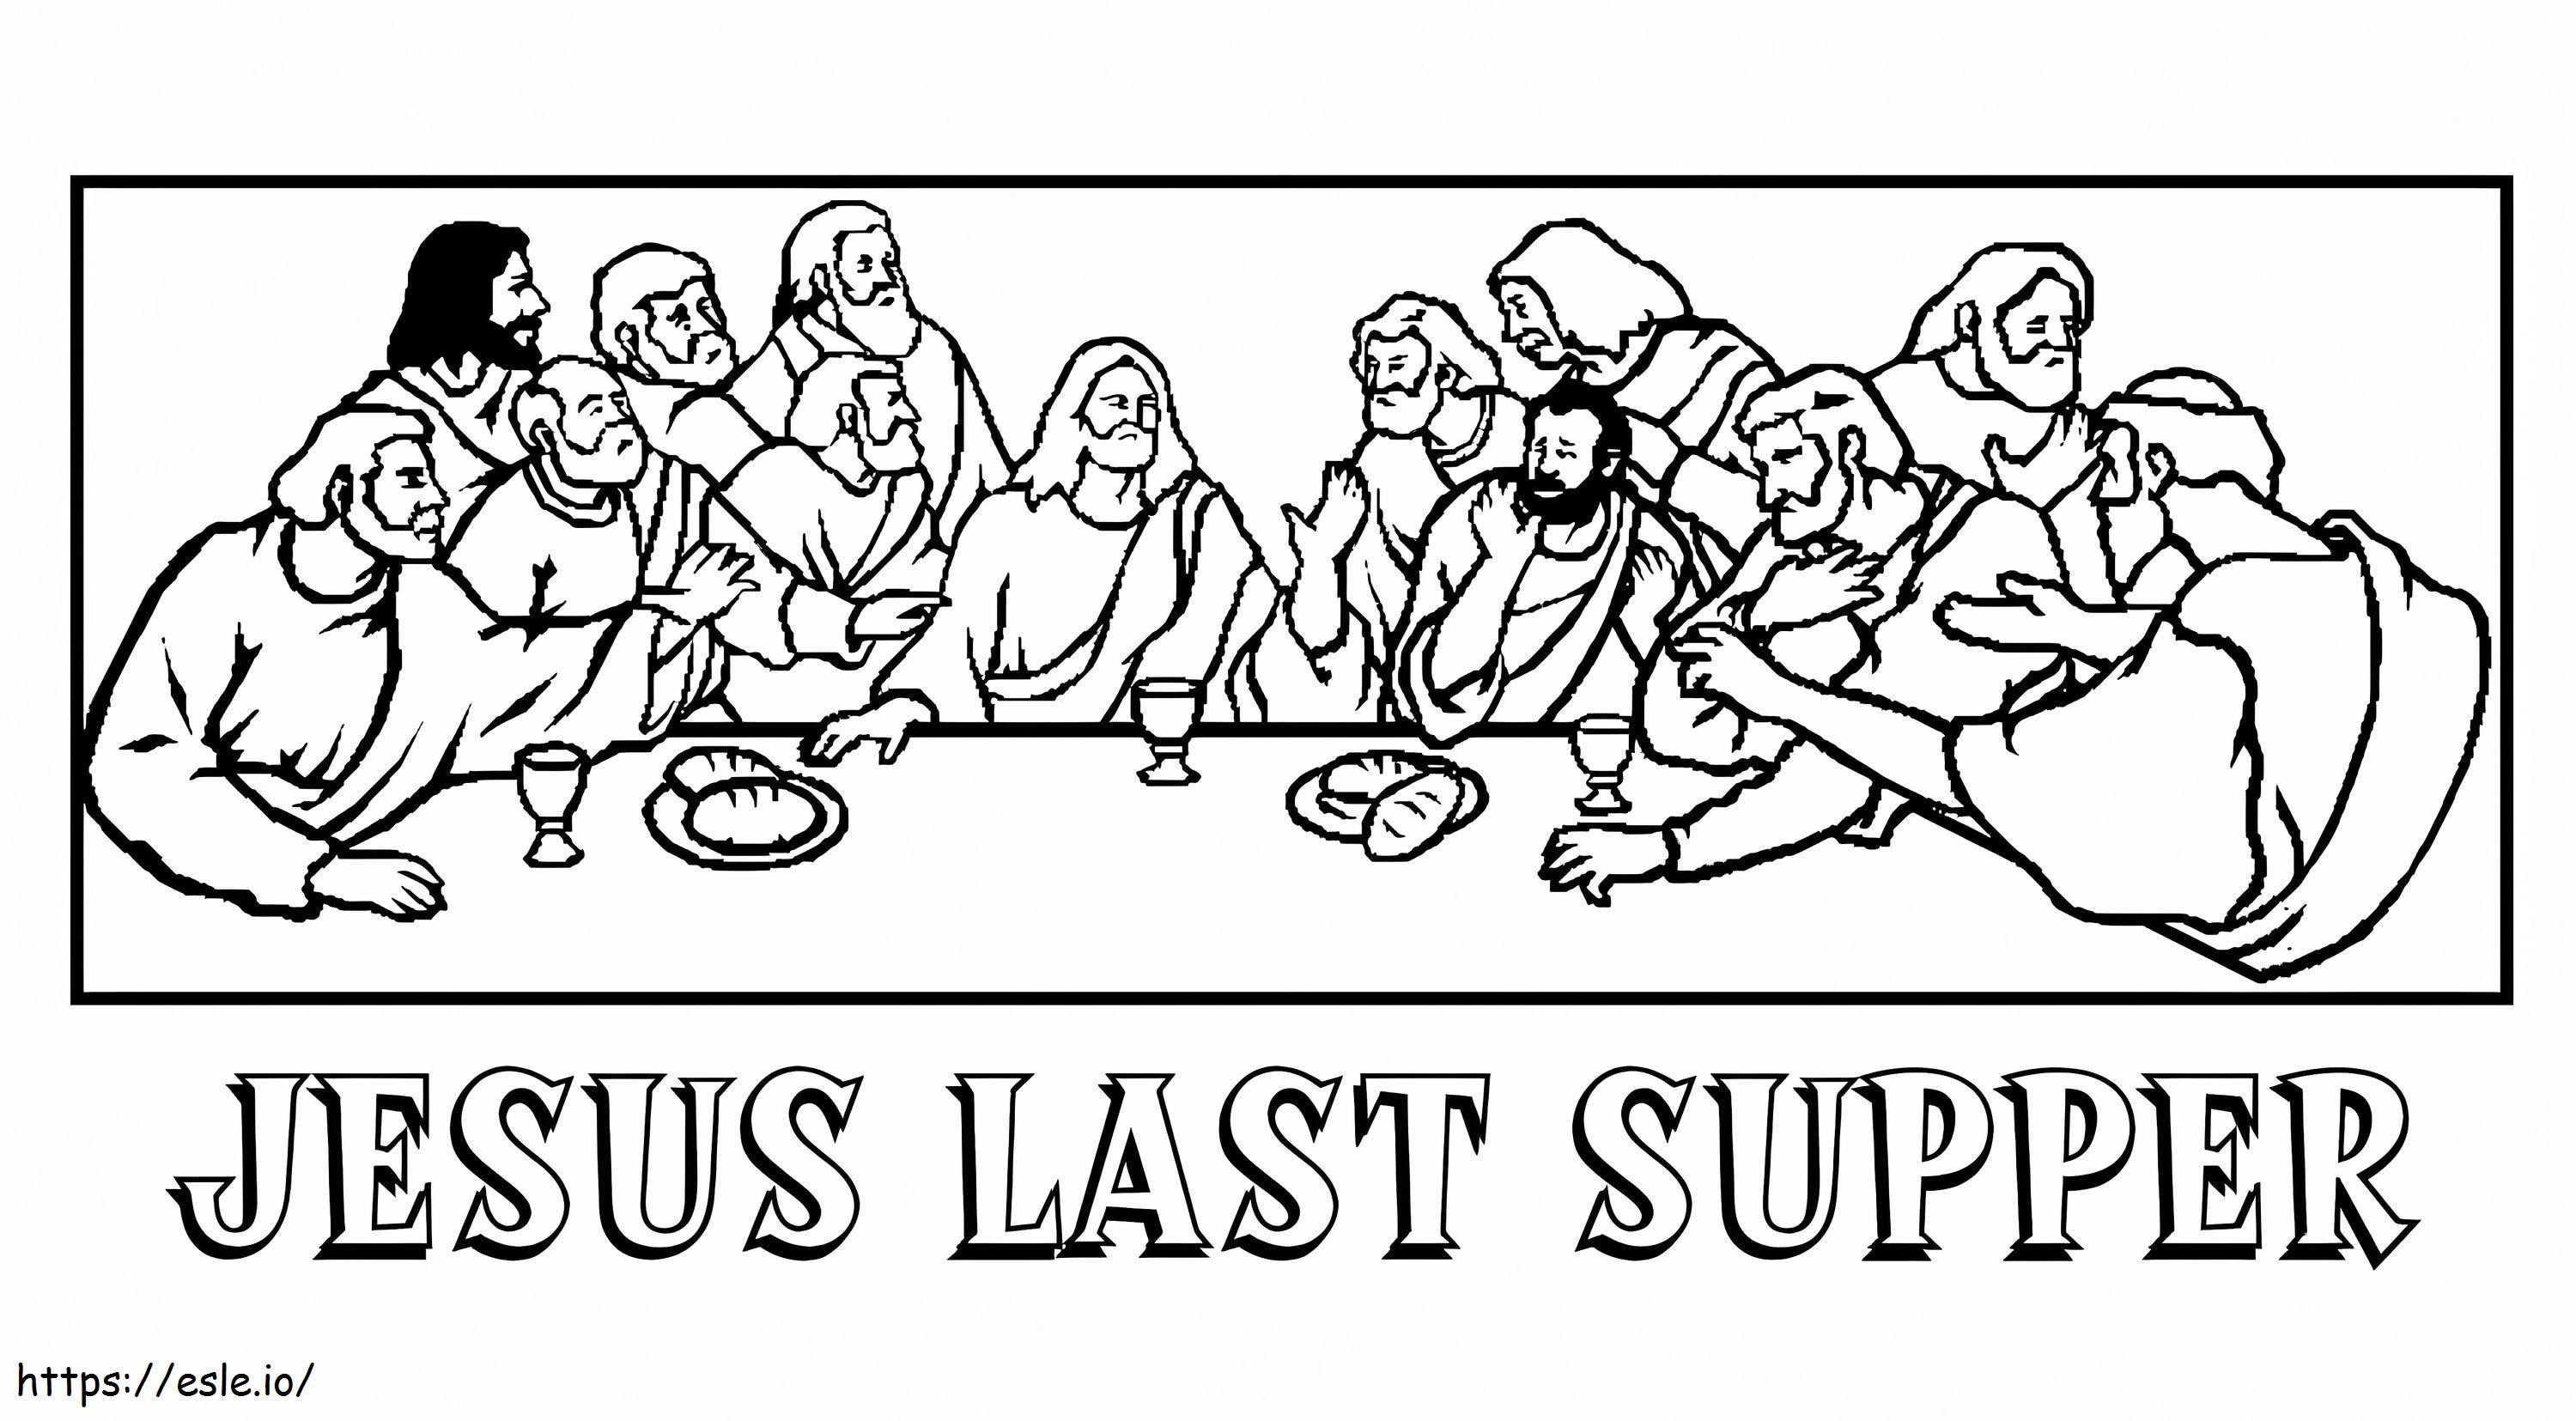 Jesus The Last Supper coloring page